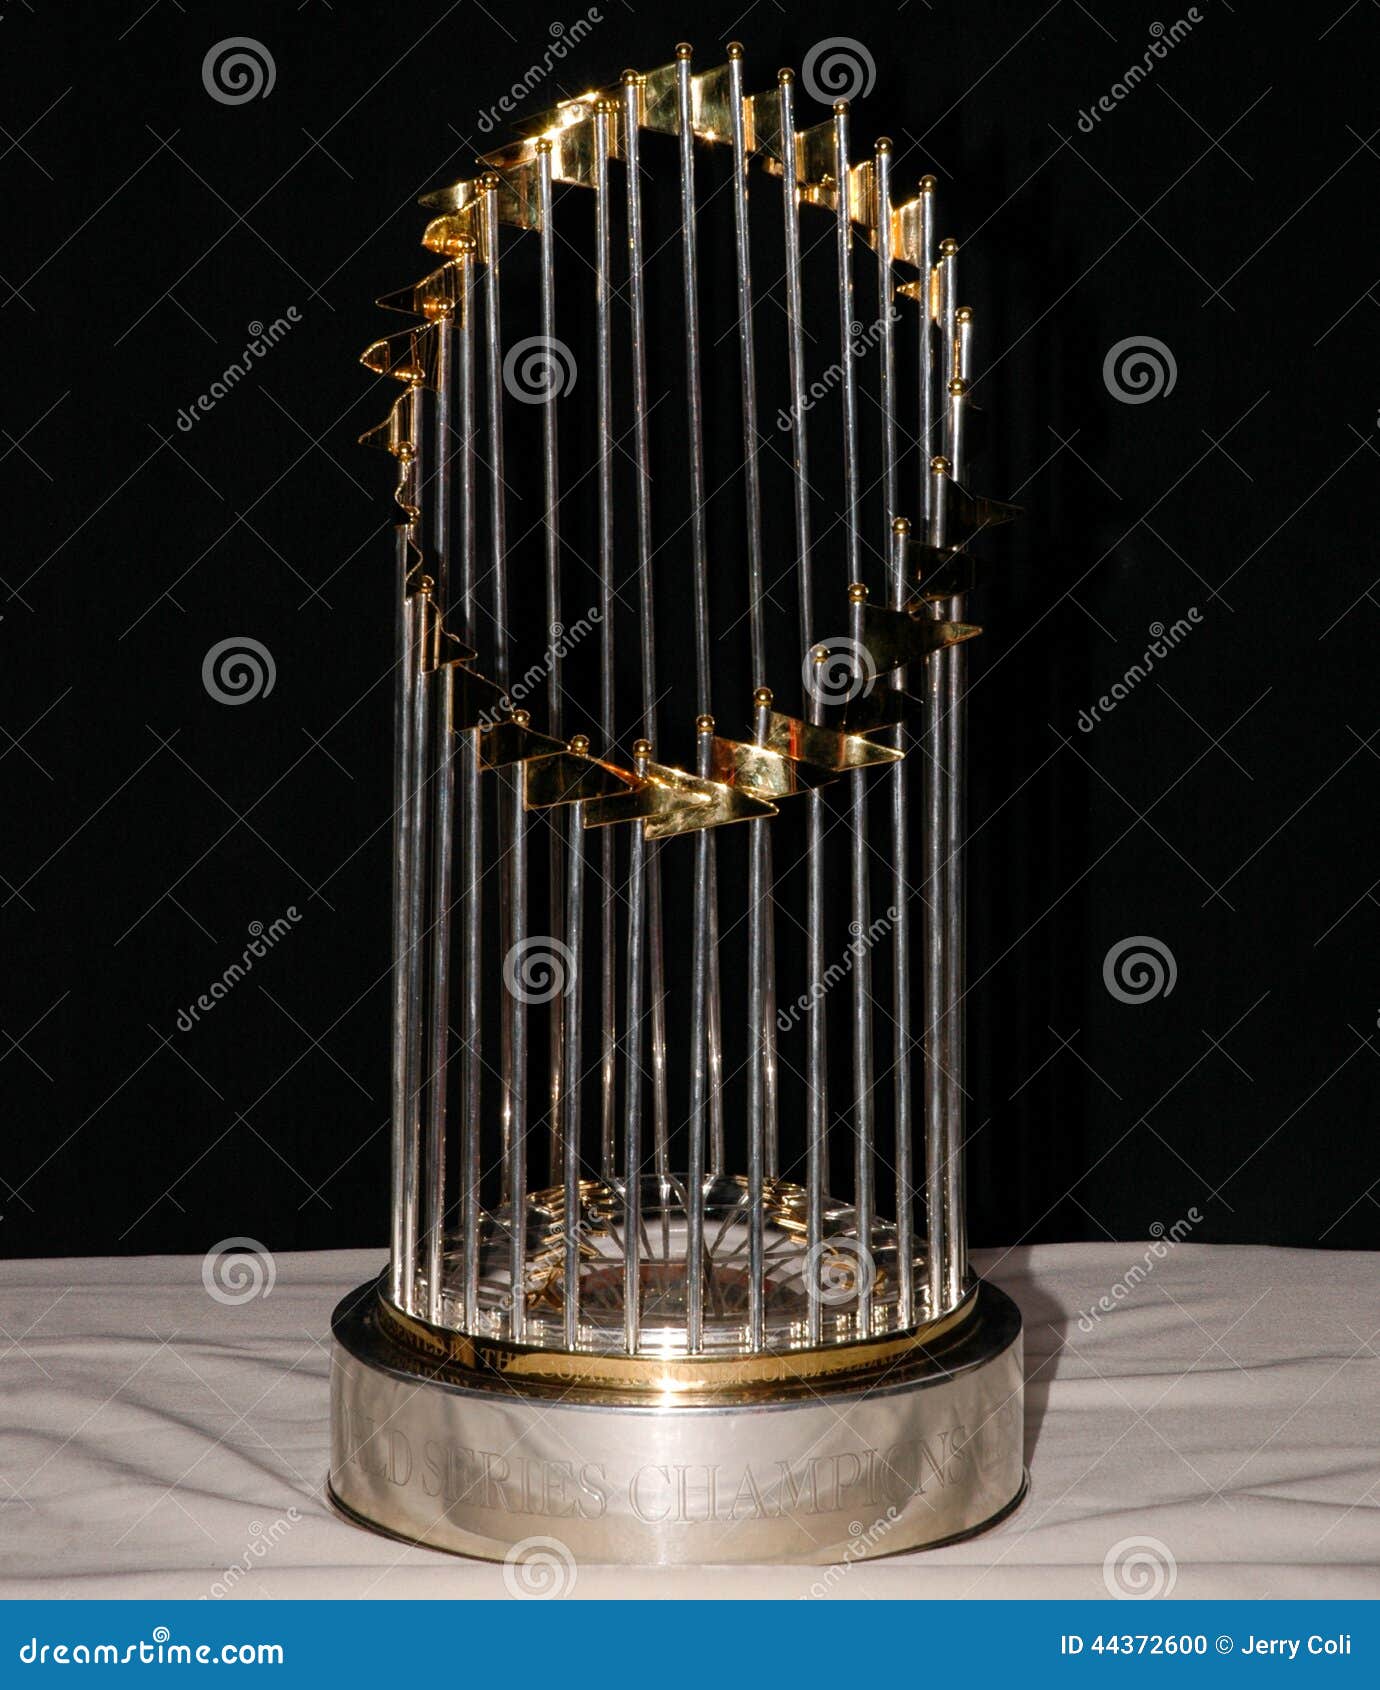 red sox world series trophies